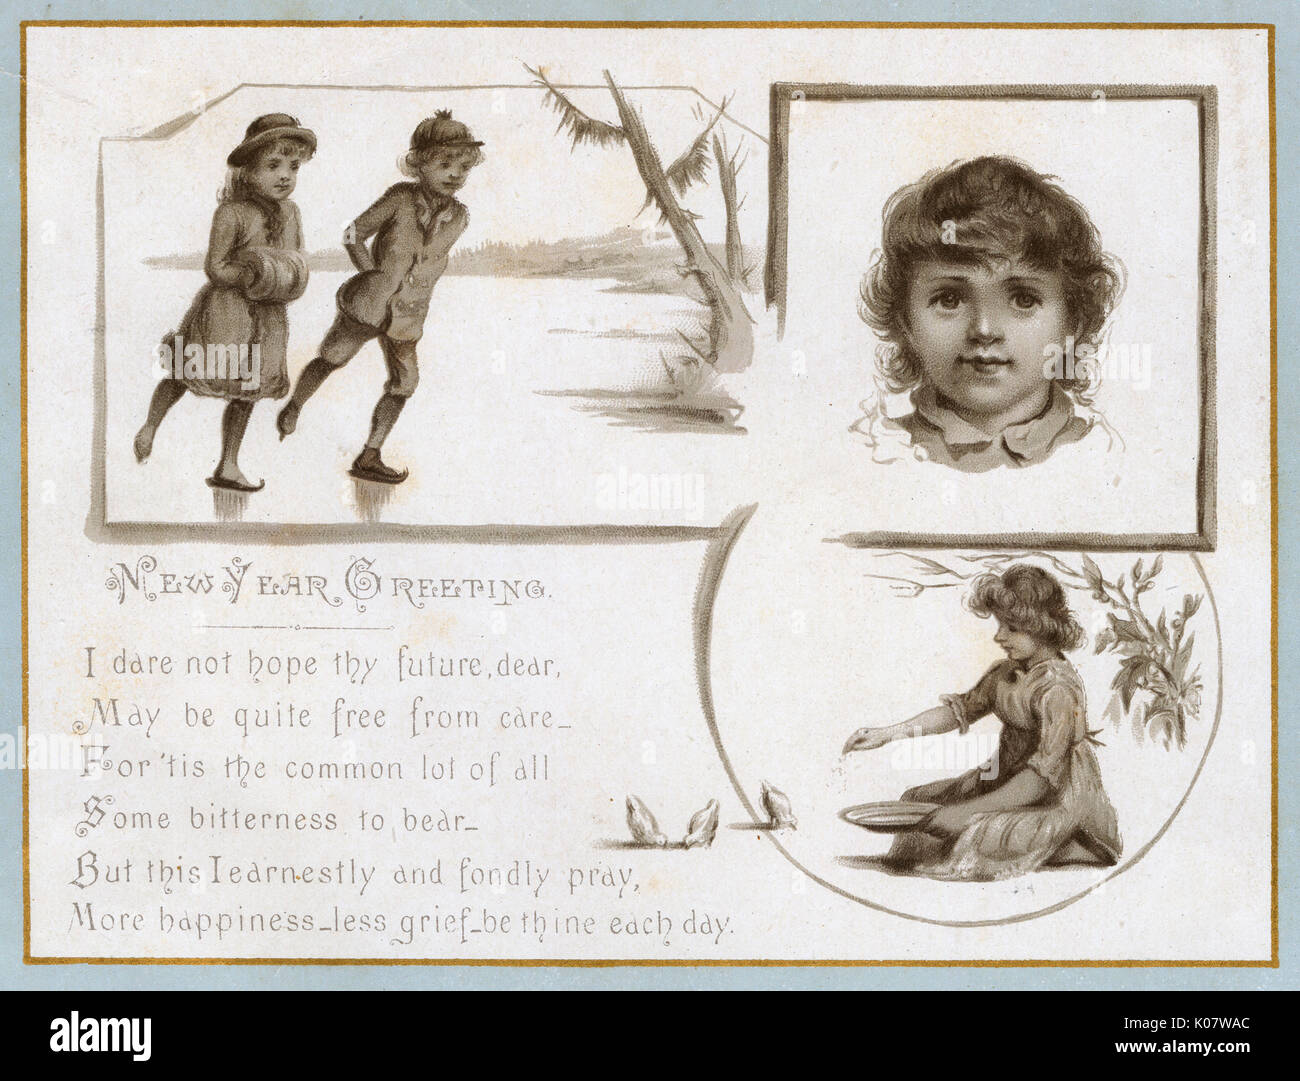 New Year Greetings - Scenes of Children and poetic musings     Date: circa 1890 Stock Photo